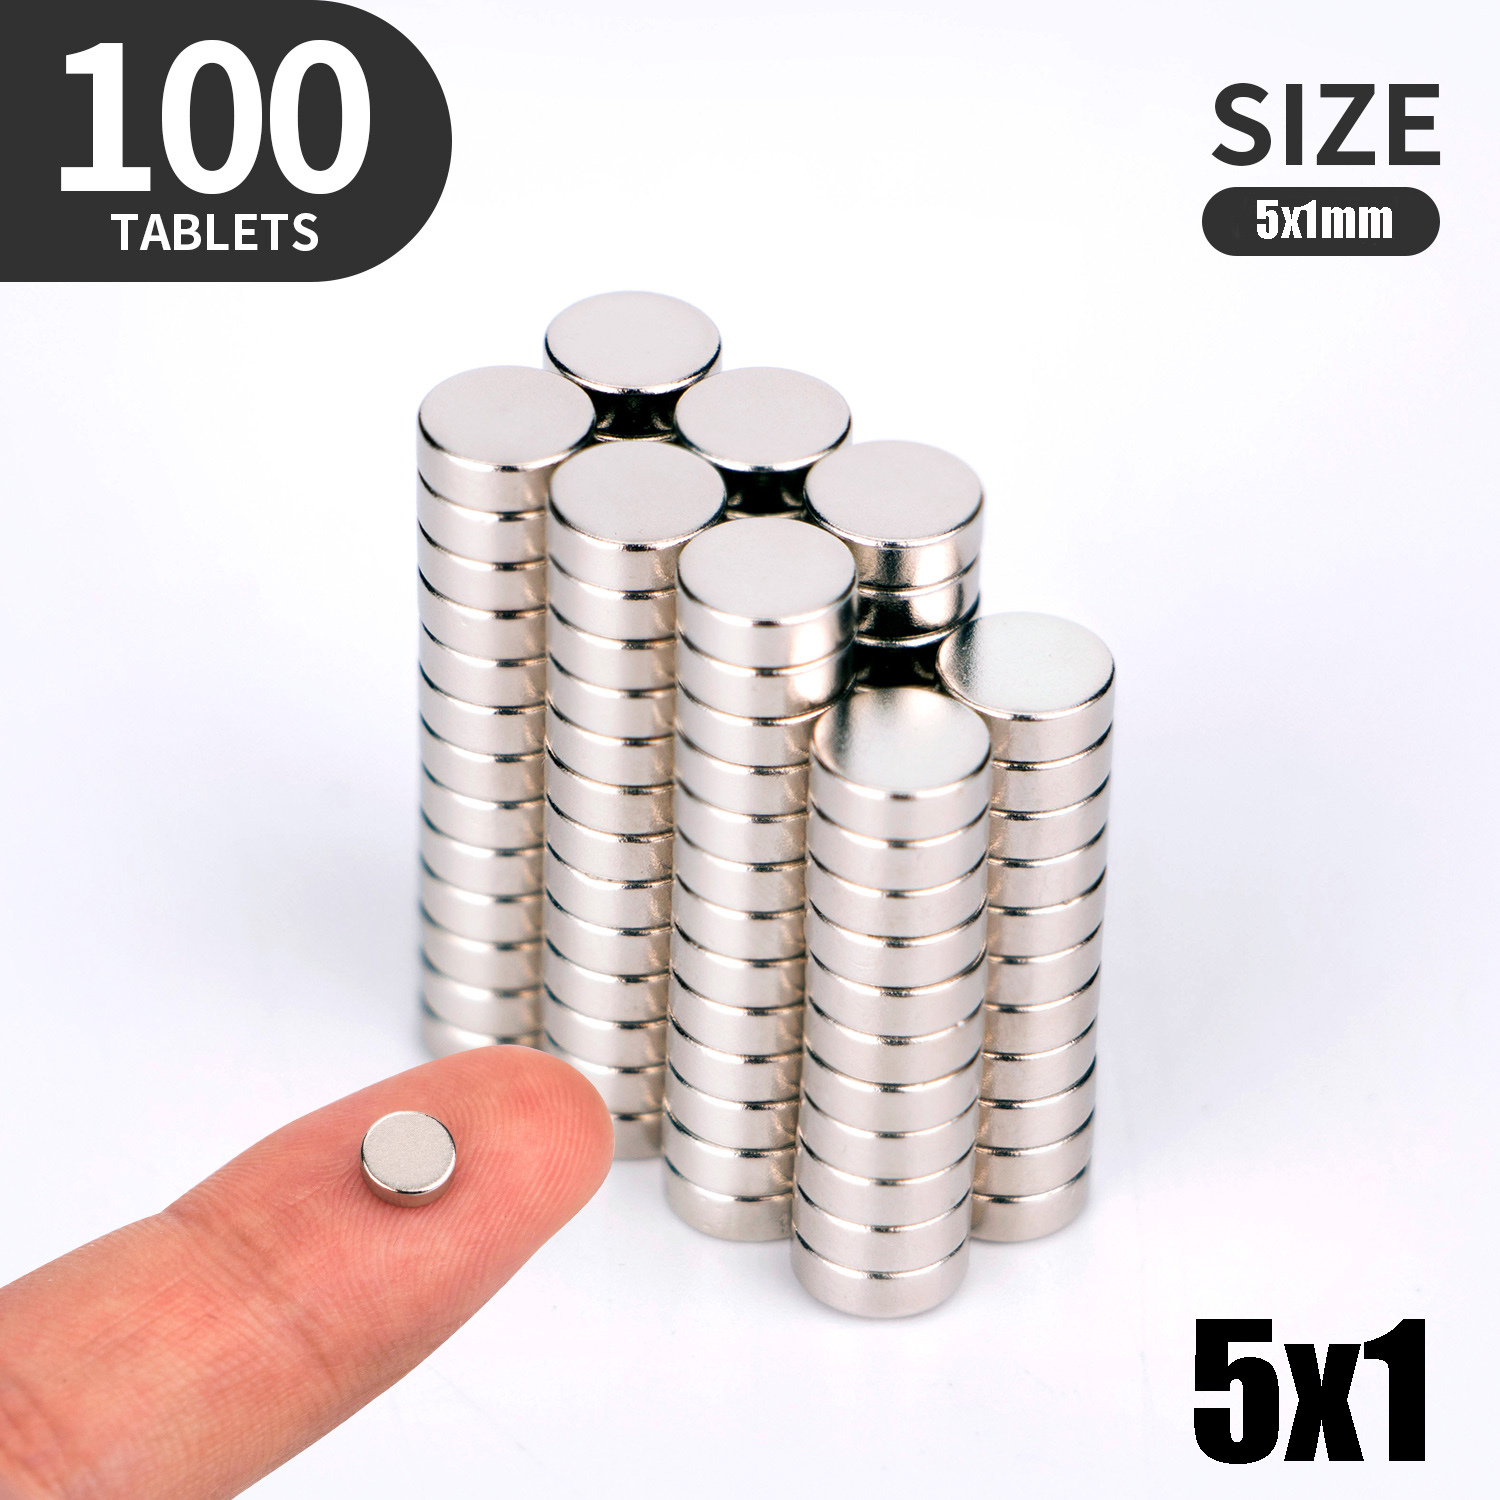 Neodymium Rare Earth Magnets. Set of 2 or 4 Magnets – The